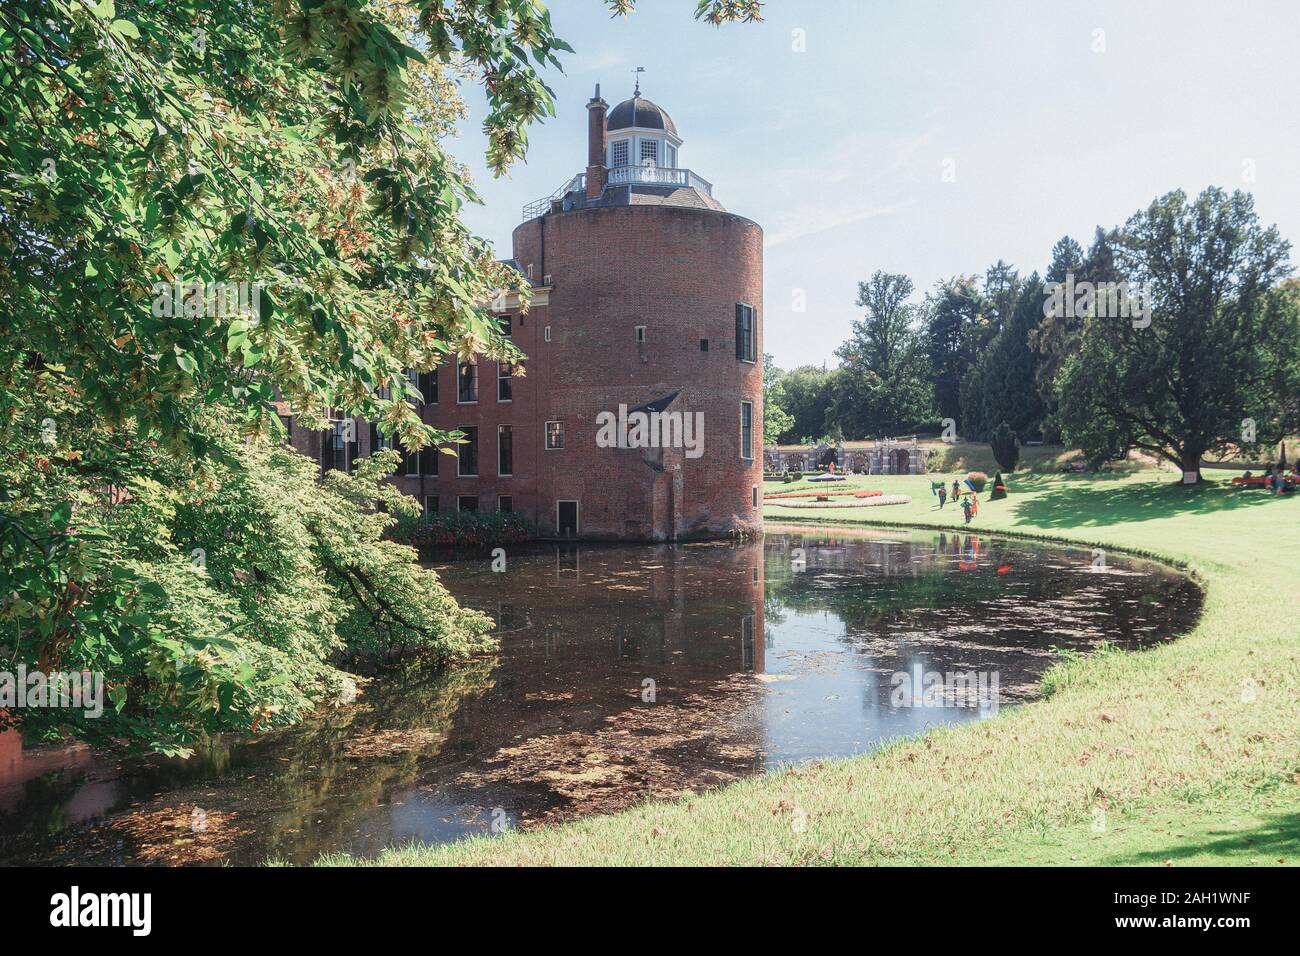 Rozendaal, Netherlands, 25 August 2019: The backside of the castle and park  Rosendael located in Rozendaal in the Netherlands Stock Photo